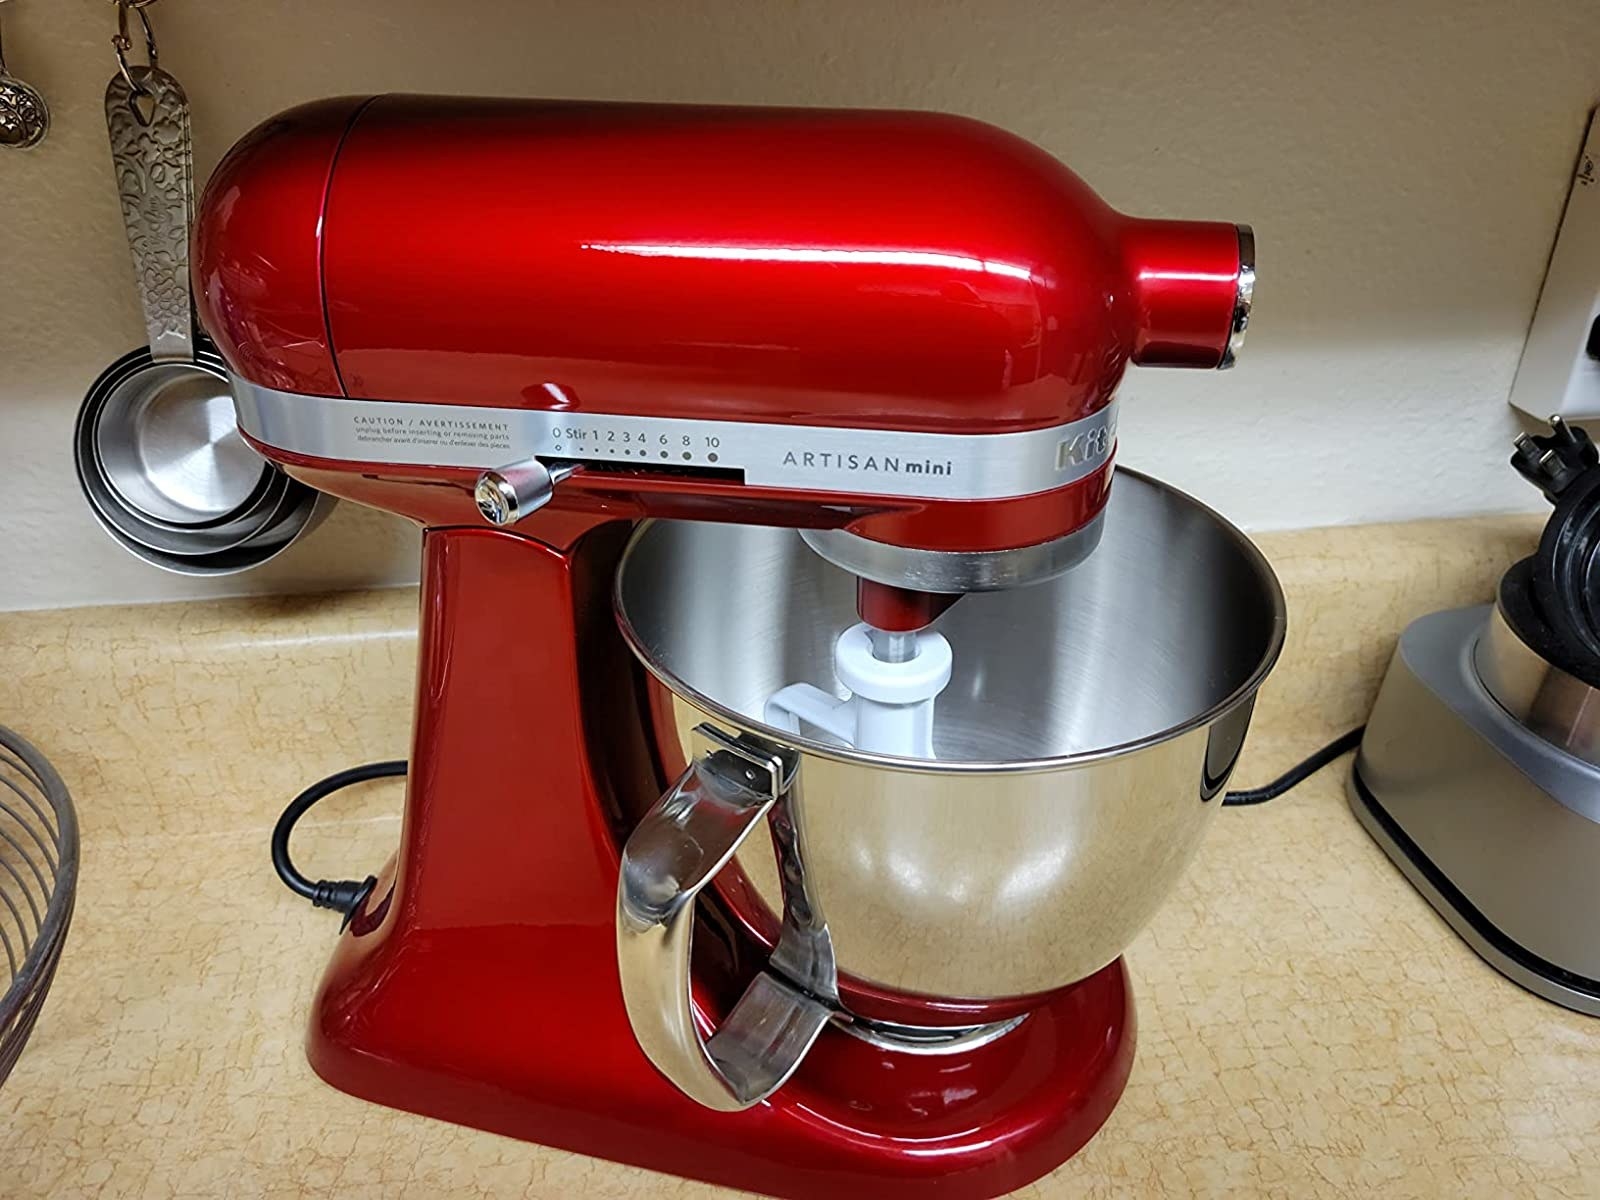 A red stand mixer is shown on a kitchen countertop